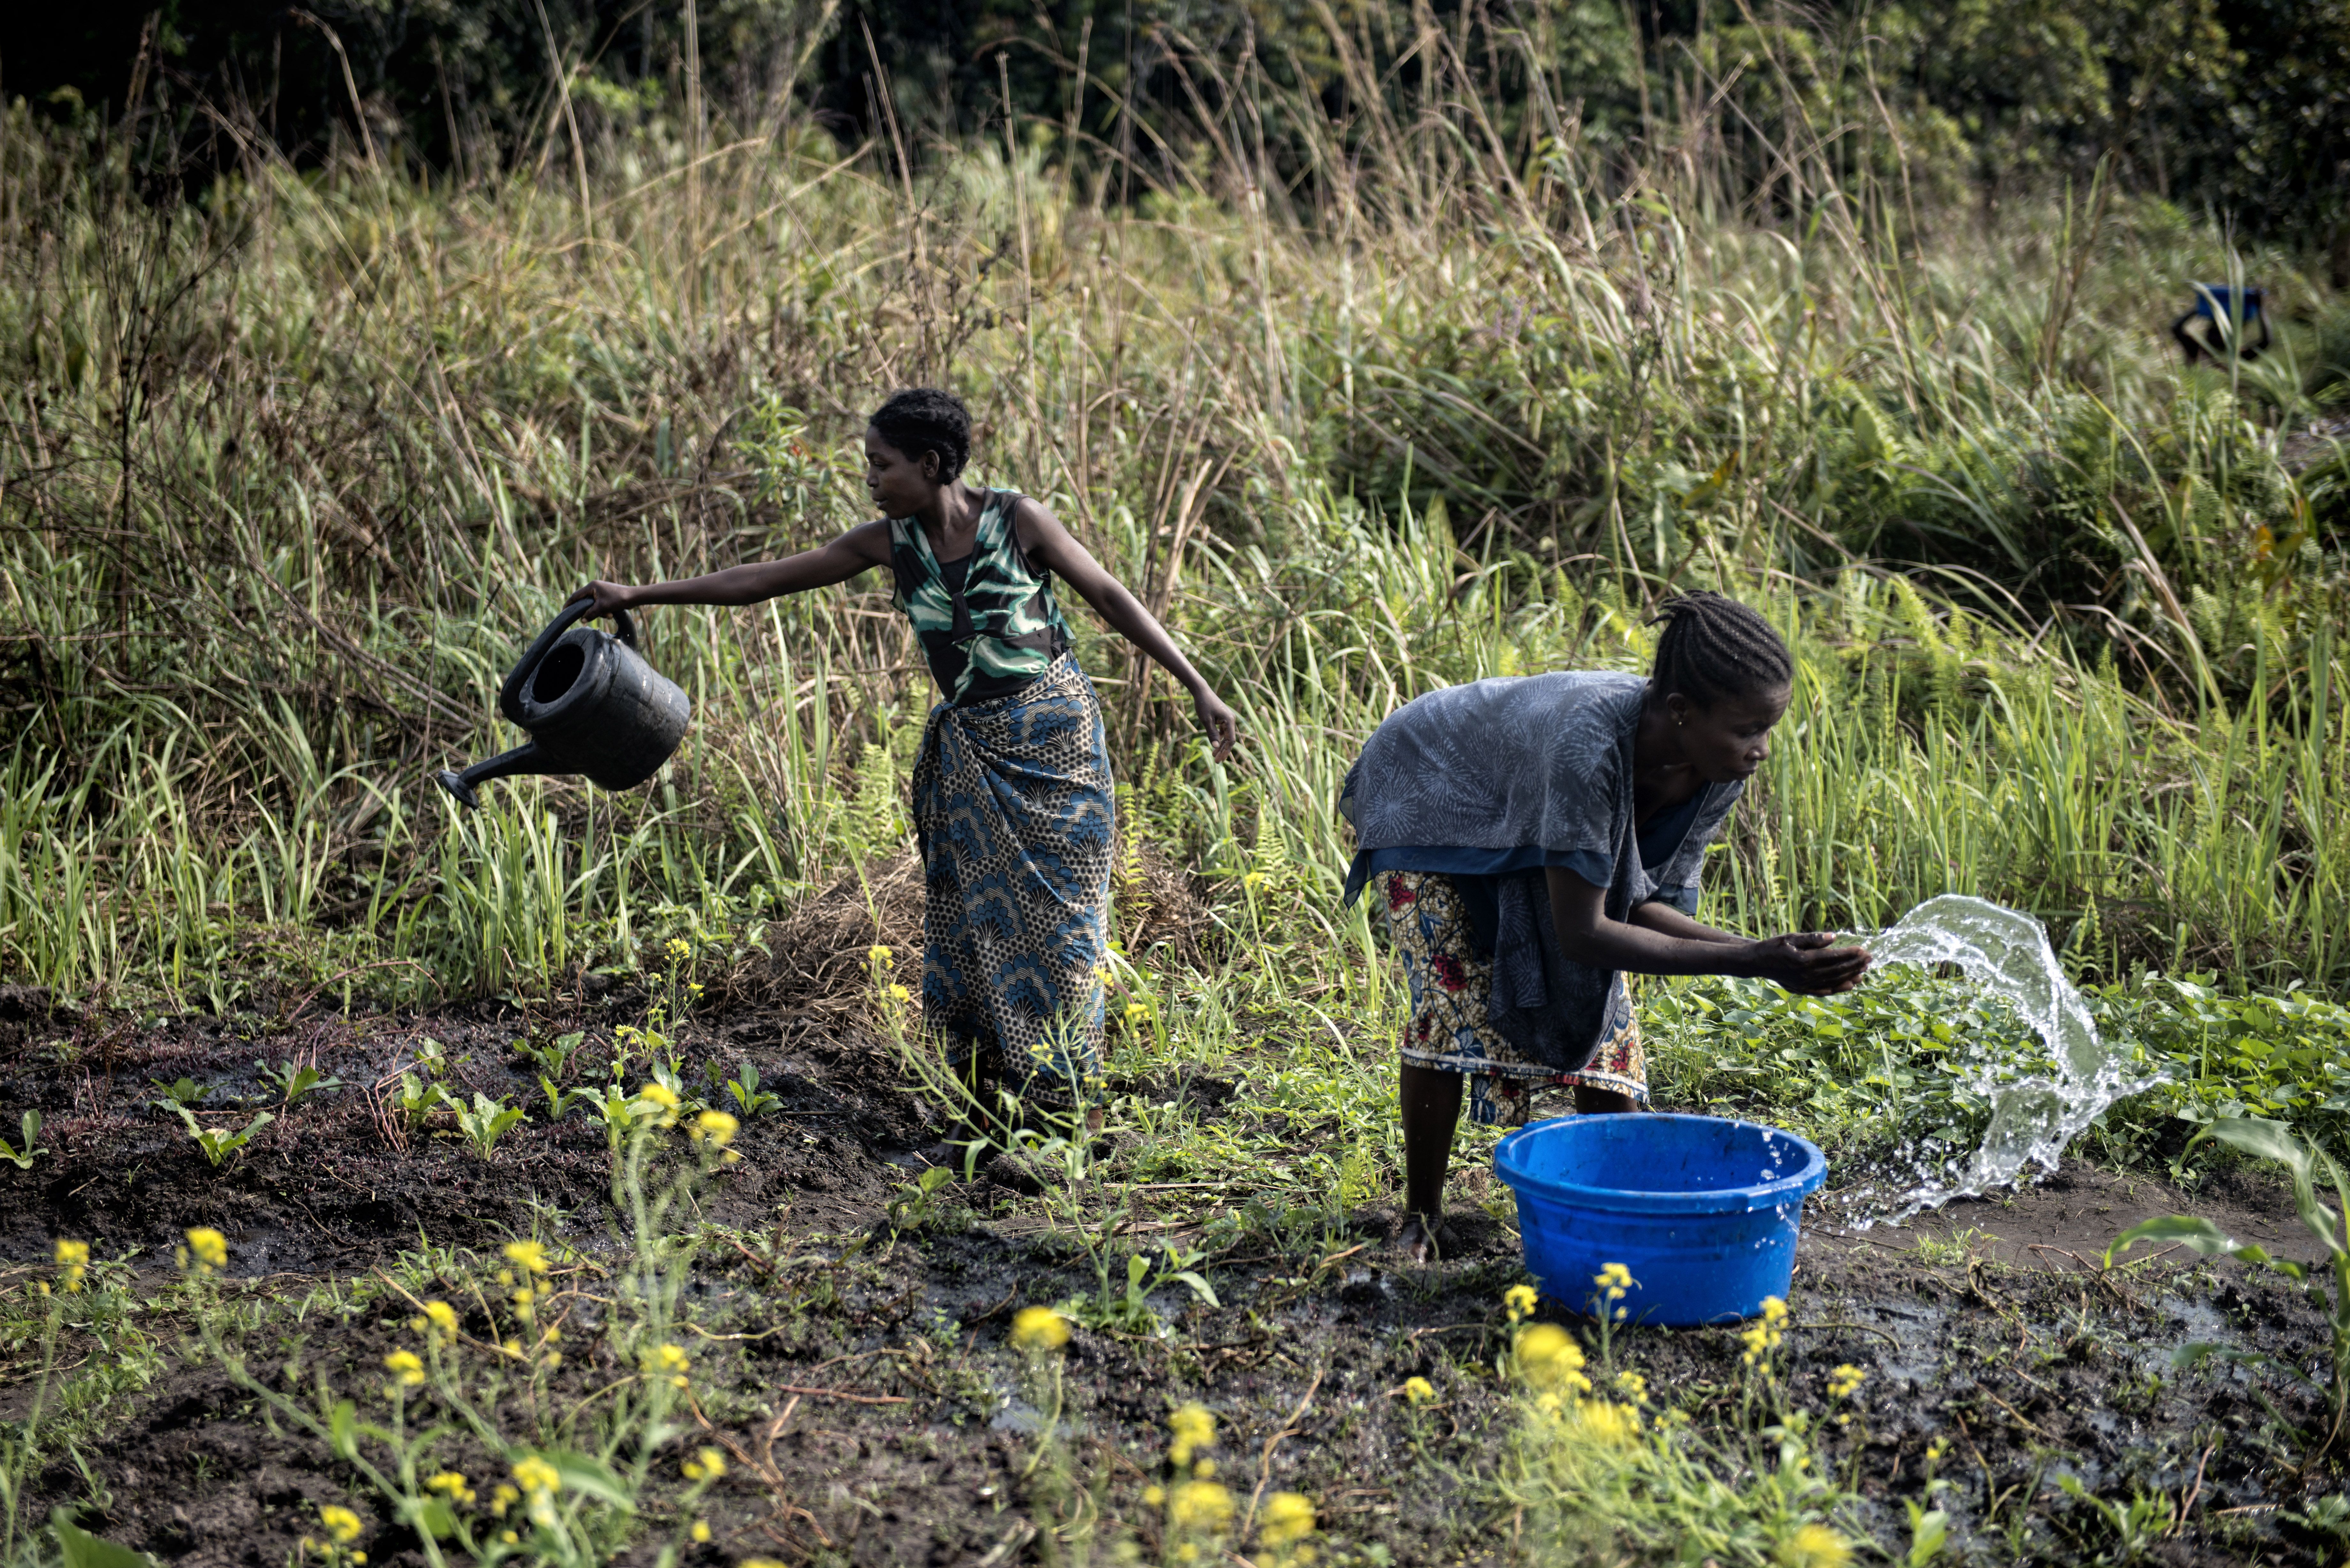 Ngolu Kulemfuka (left) and a friend tend to a small plot of land where they try and grow other types of vegetables. The soil makes it difficult for anything other than cassava to grow. Image by Neil Brandvold DRC, 2016.